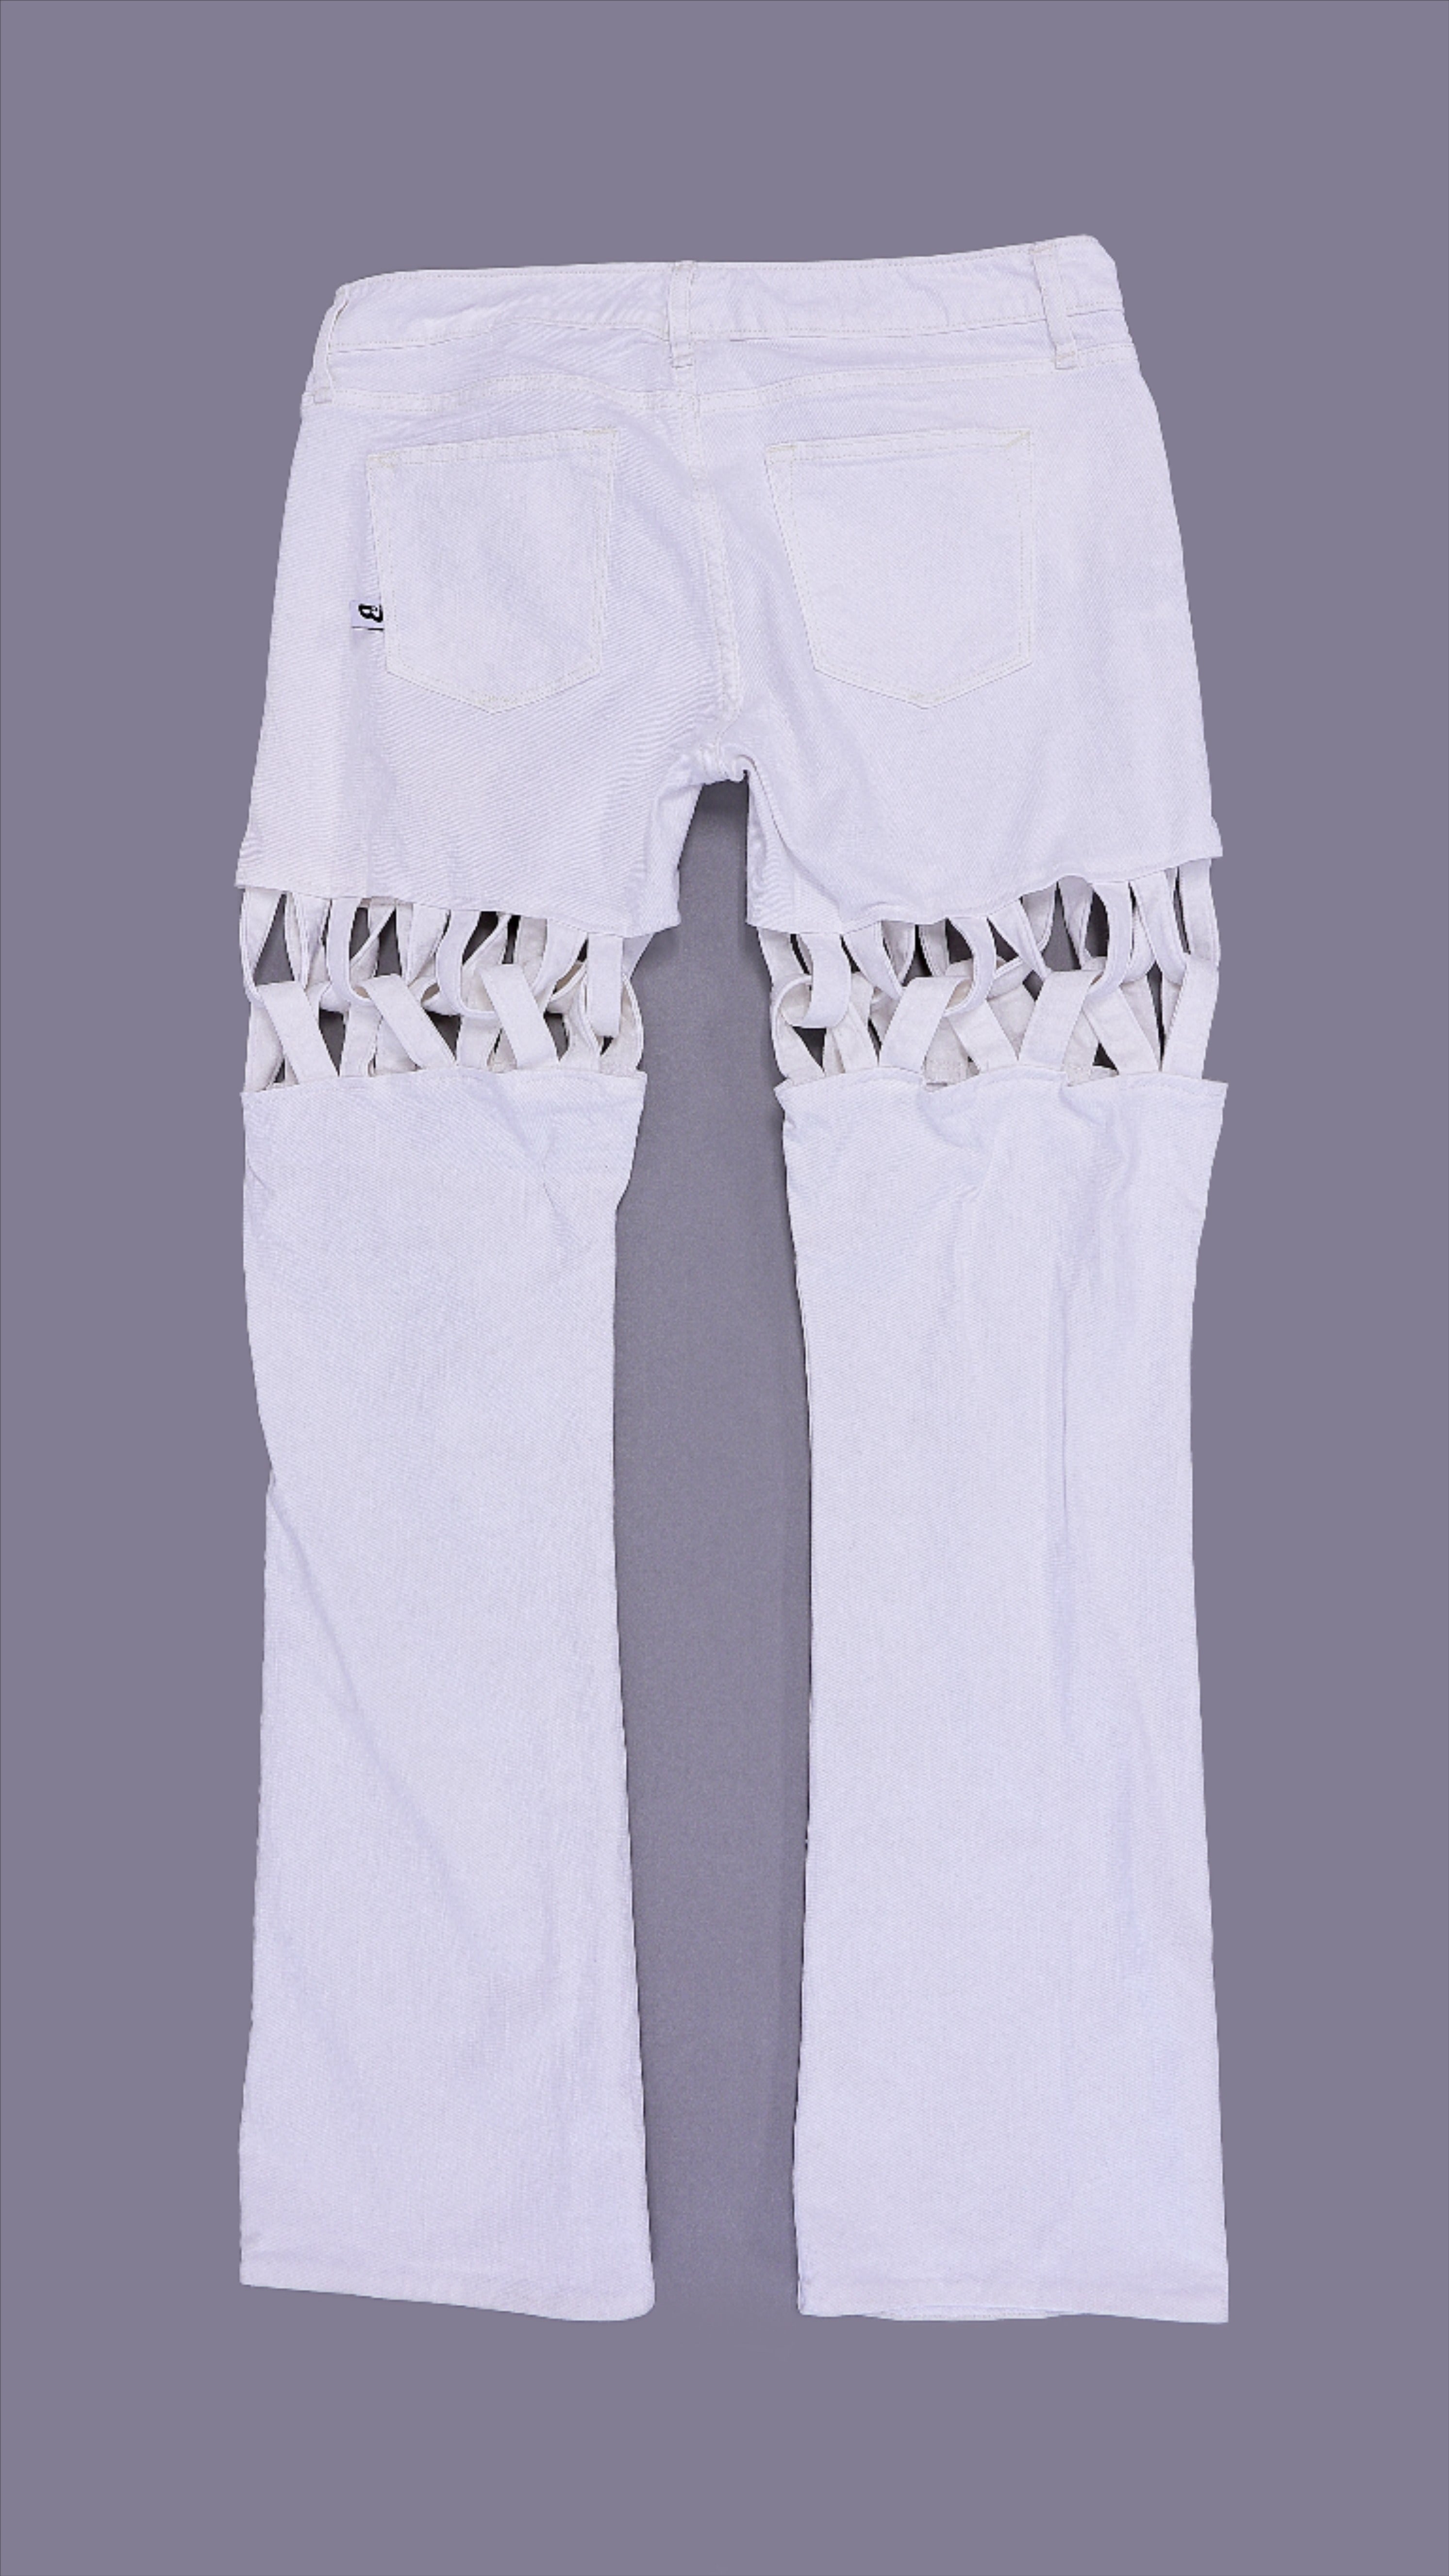 Criss Cross Jeans - White (Size 8)